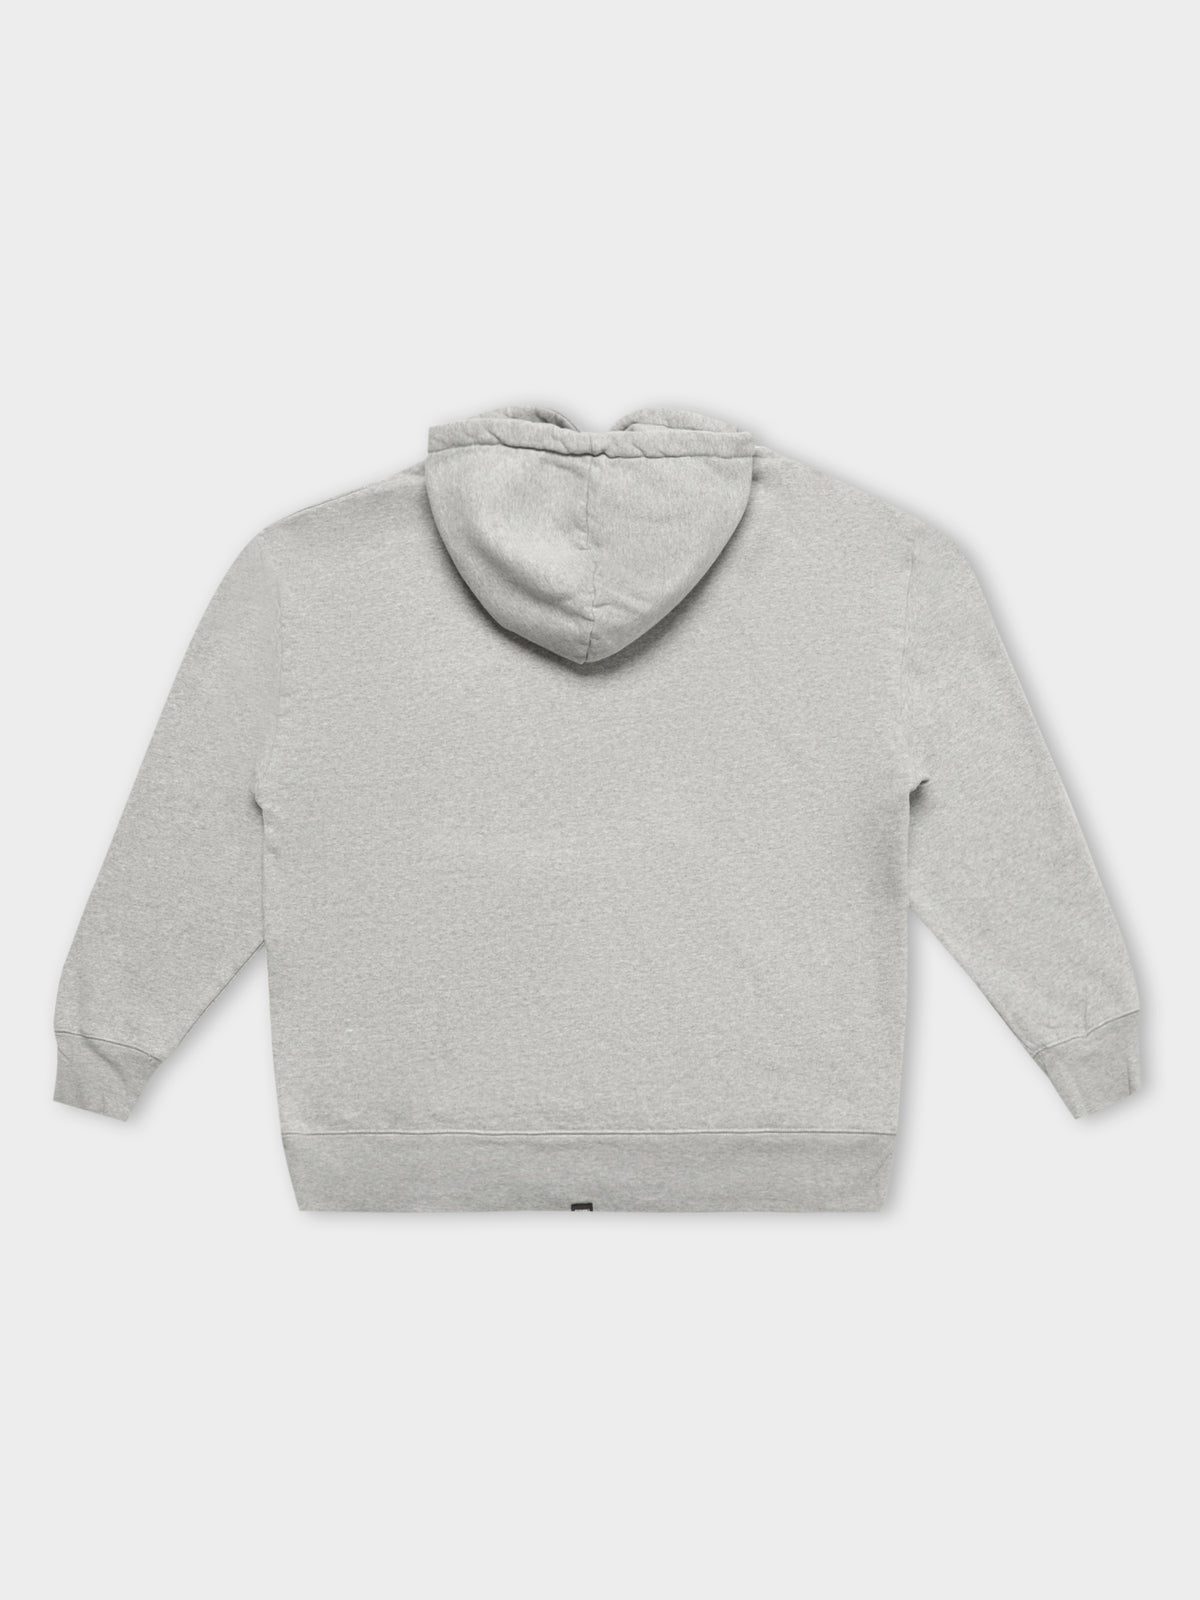 Not Forgotten Slouch Pullover in Snow Marle Grey